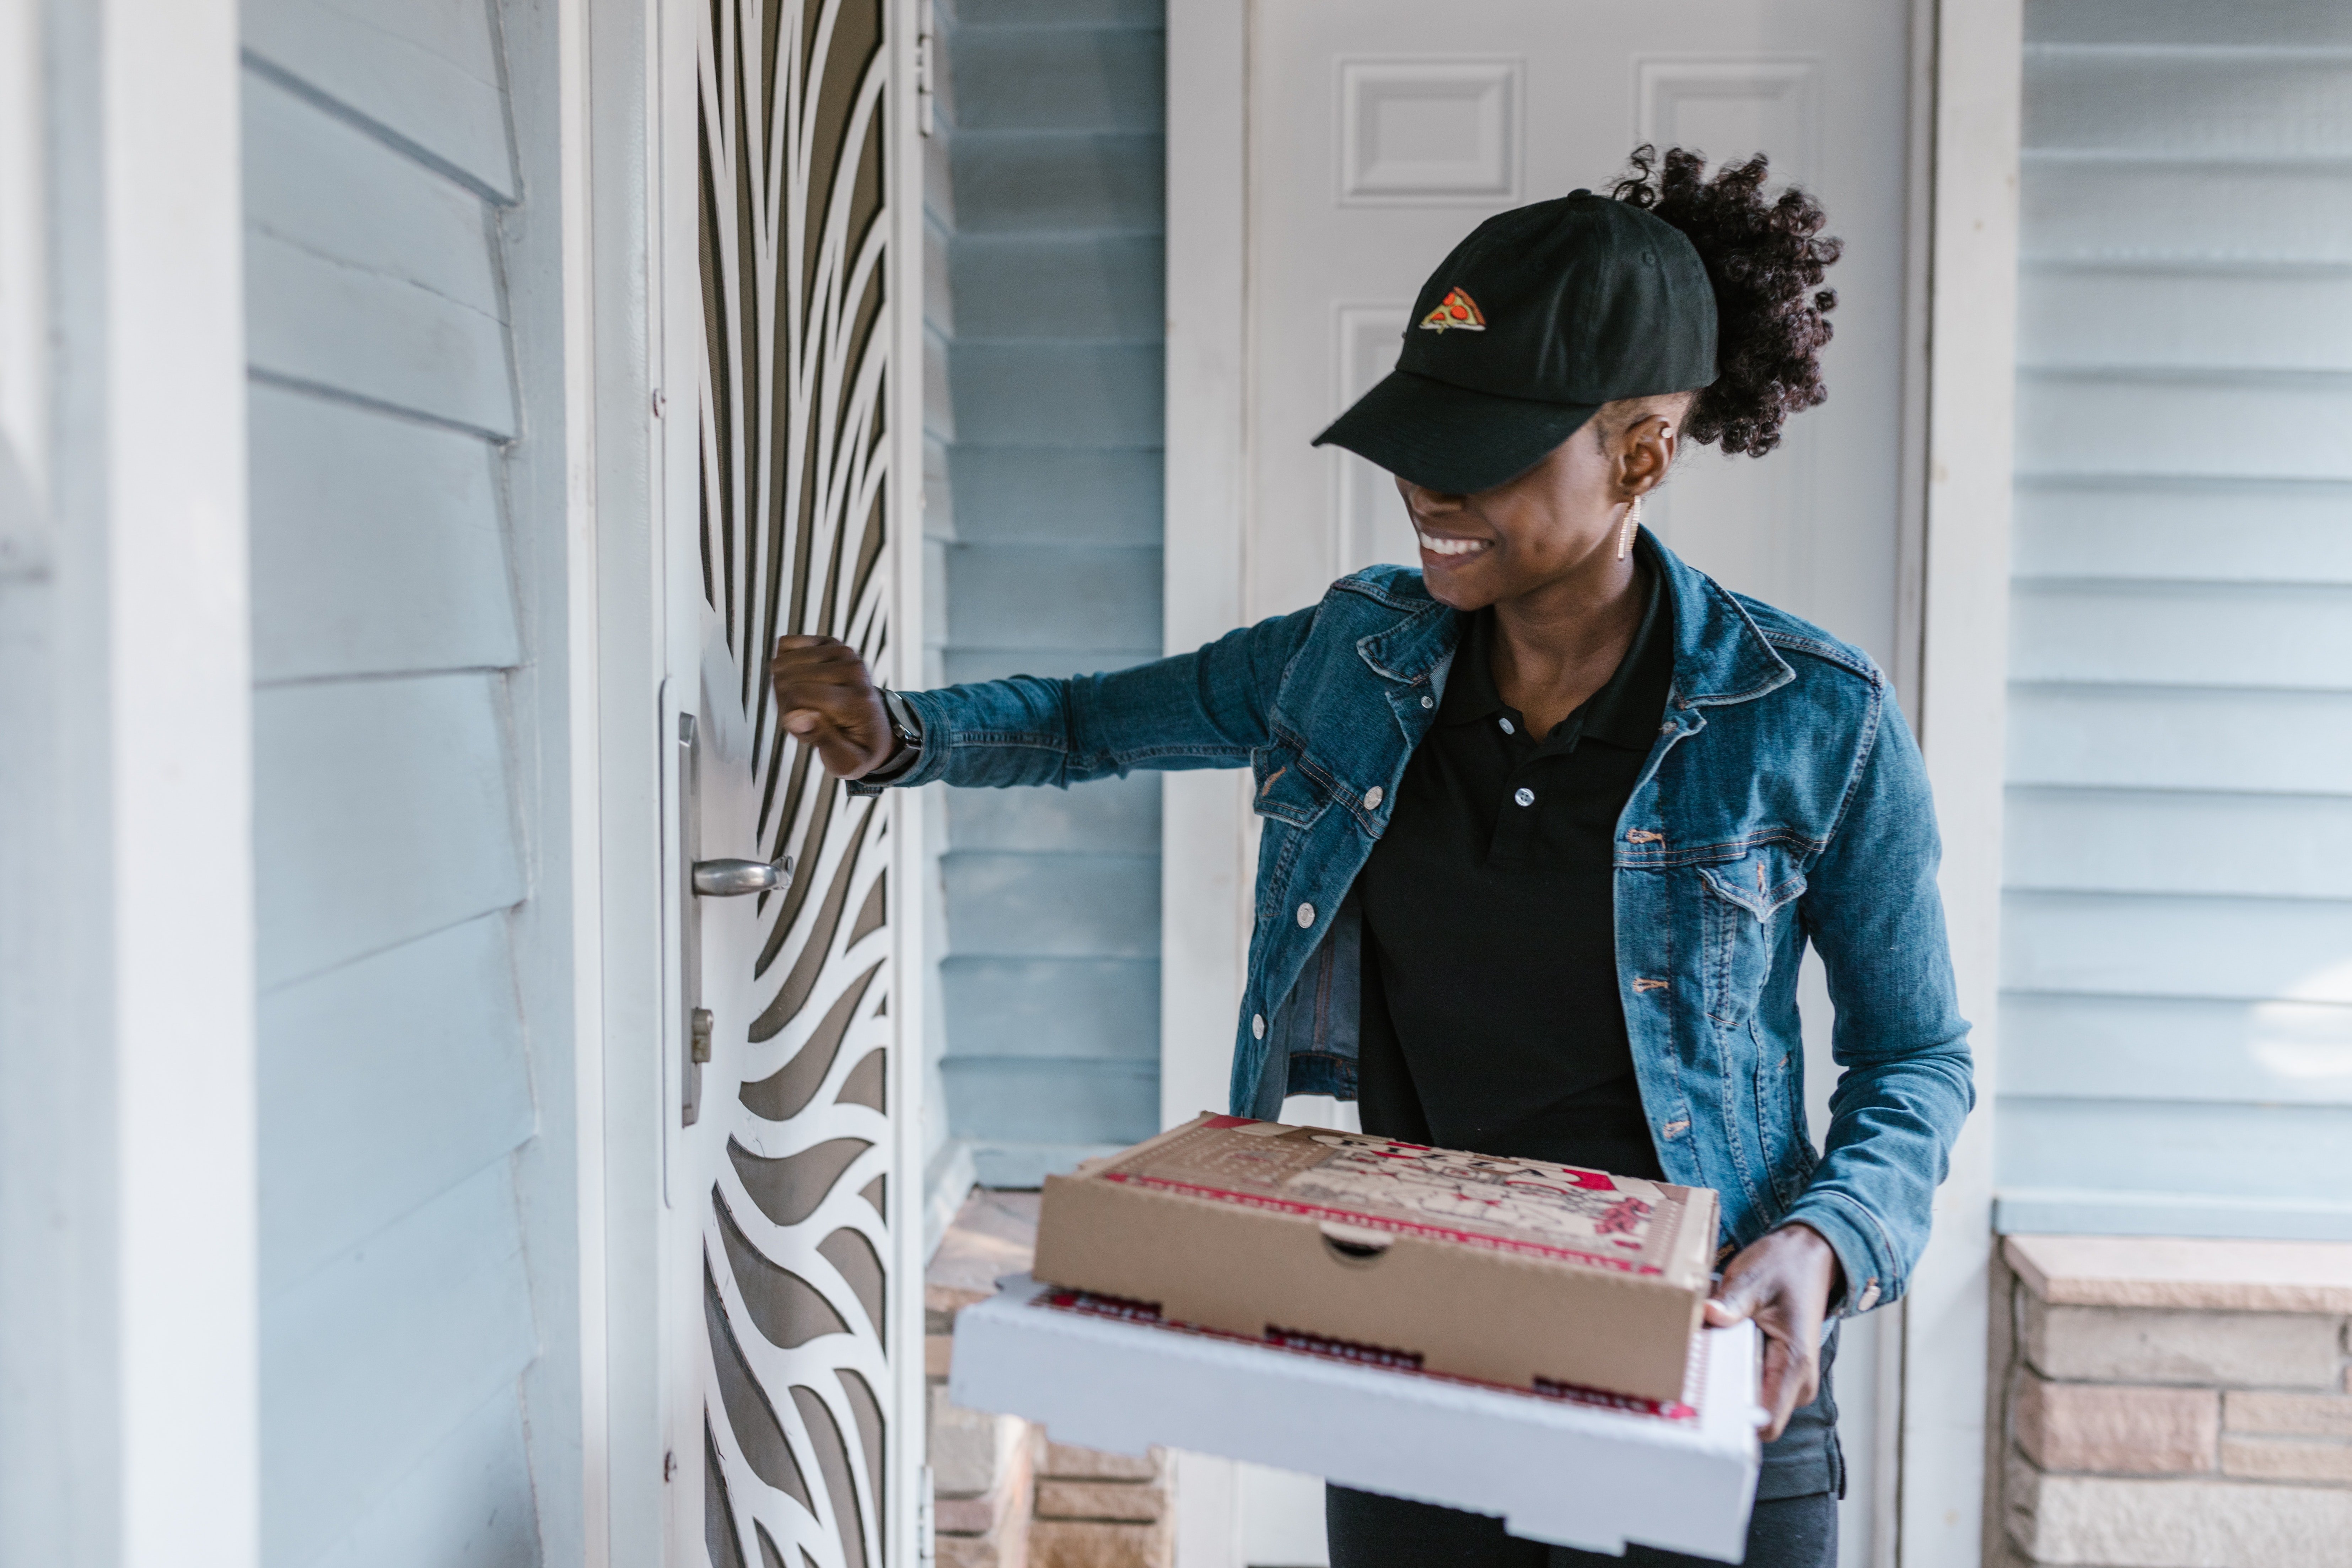  A delivery woman knocking on the door. | Photo: Pexels/RODNAE Productions